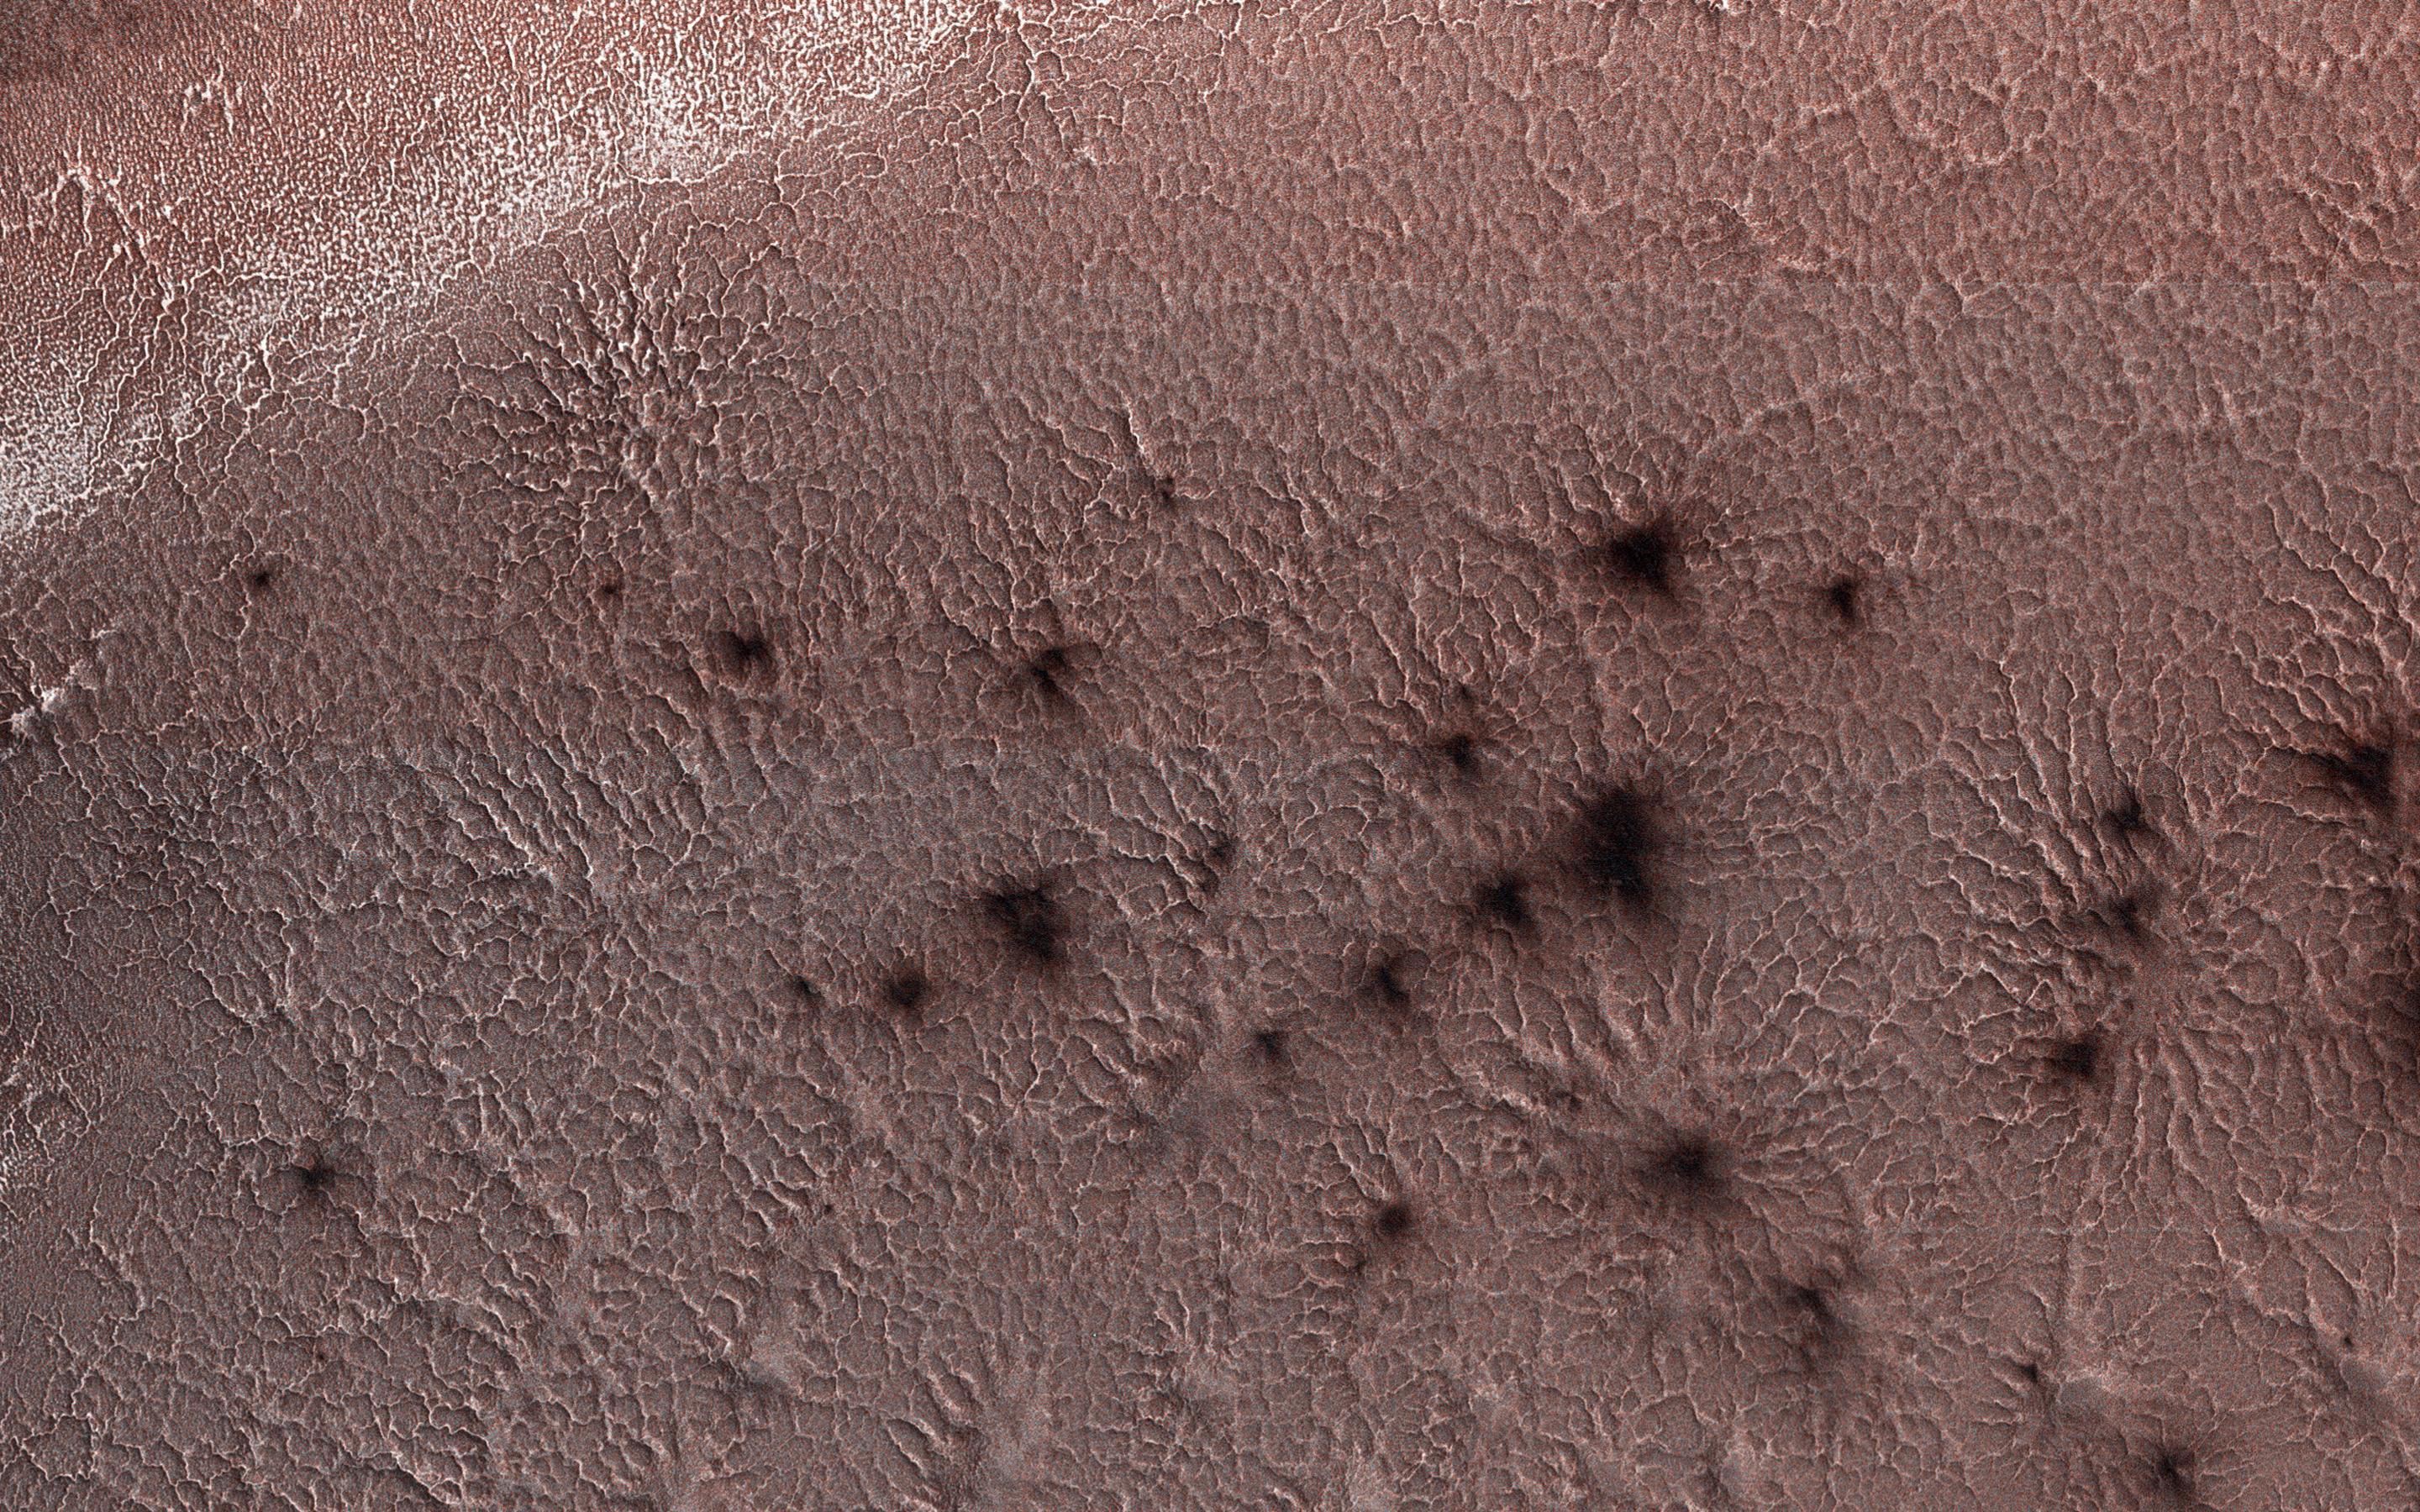 PIA22587: Jamming with the 'Spiders' from Mars